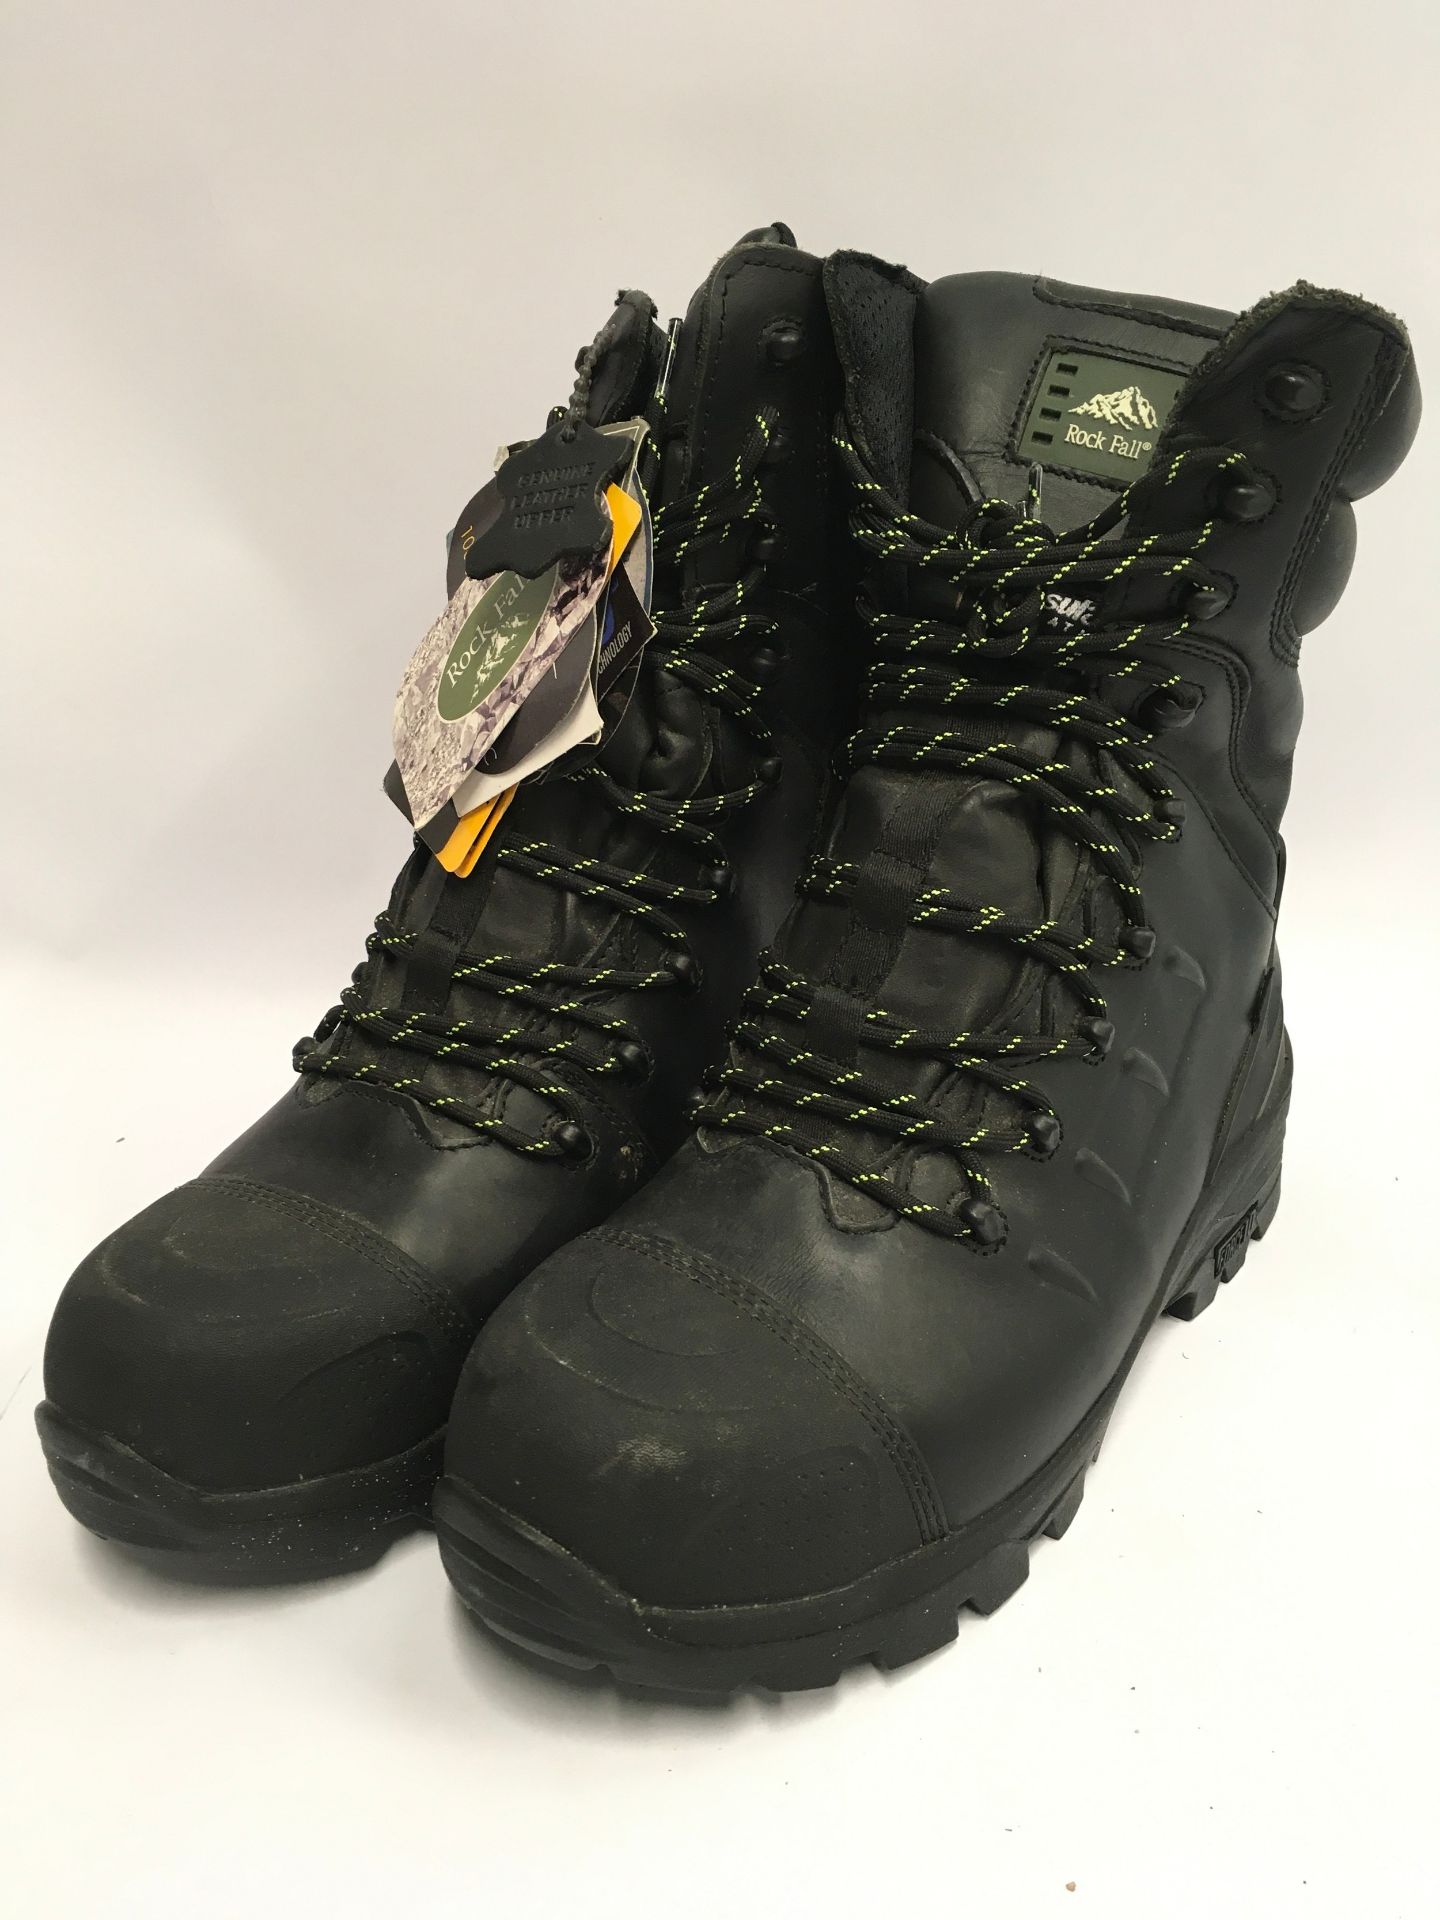 Pair of Rock Fall work boots. Size 9 (20.